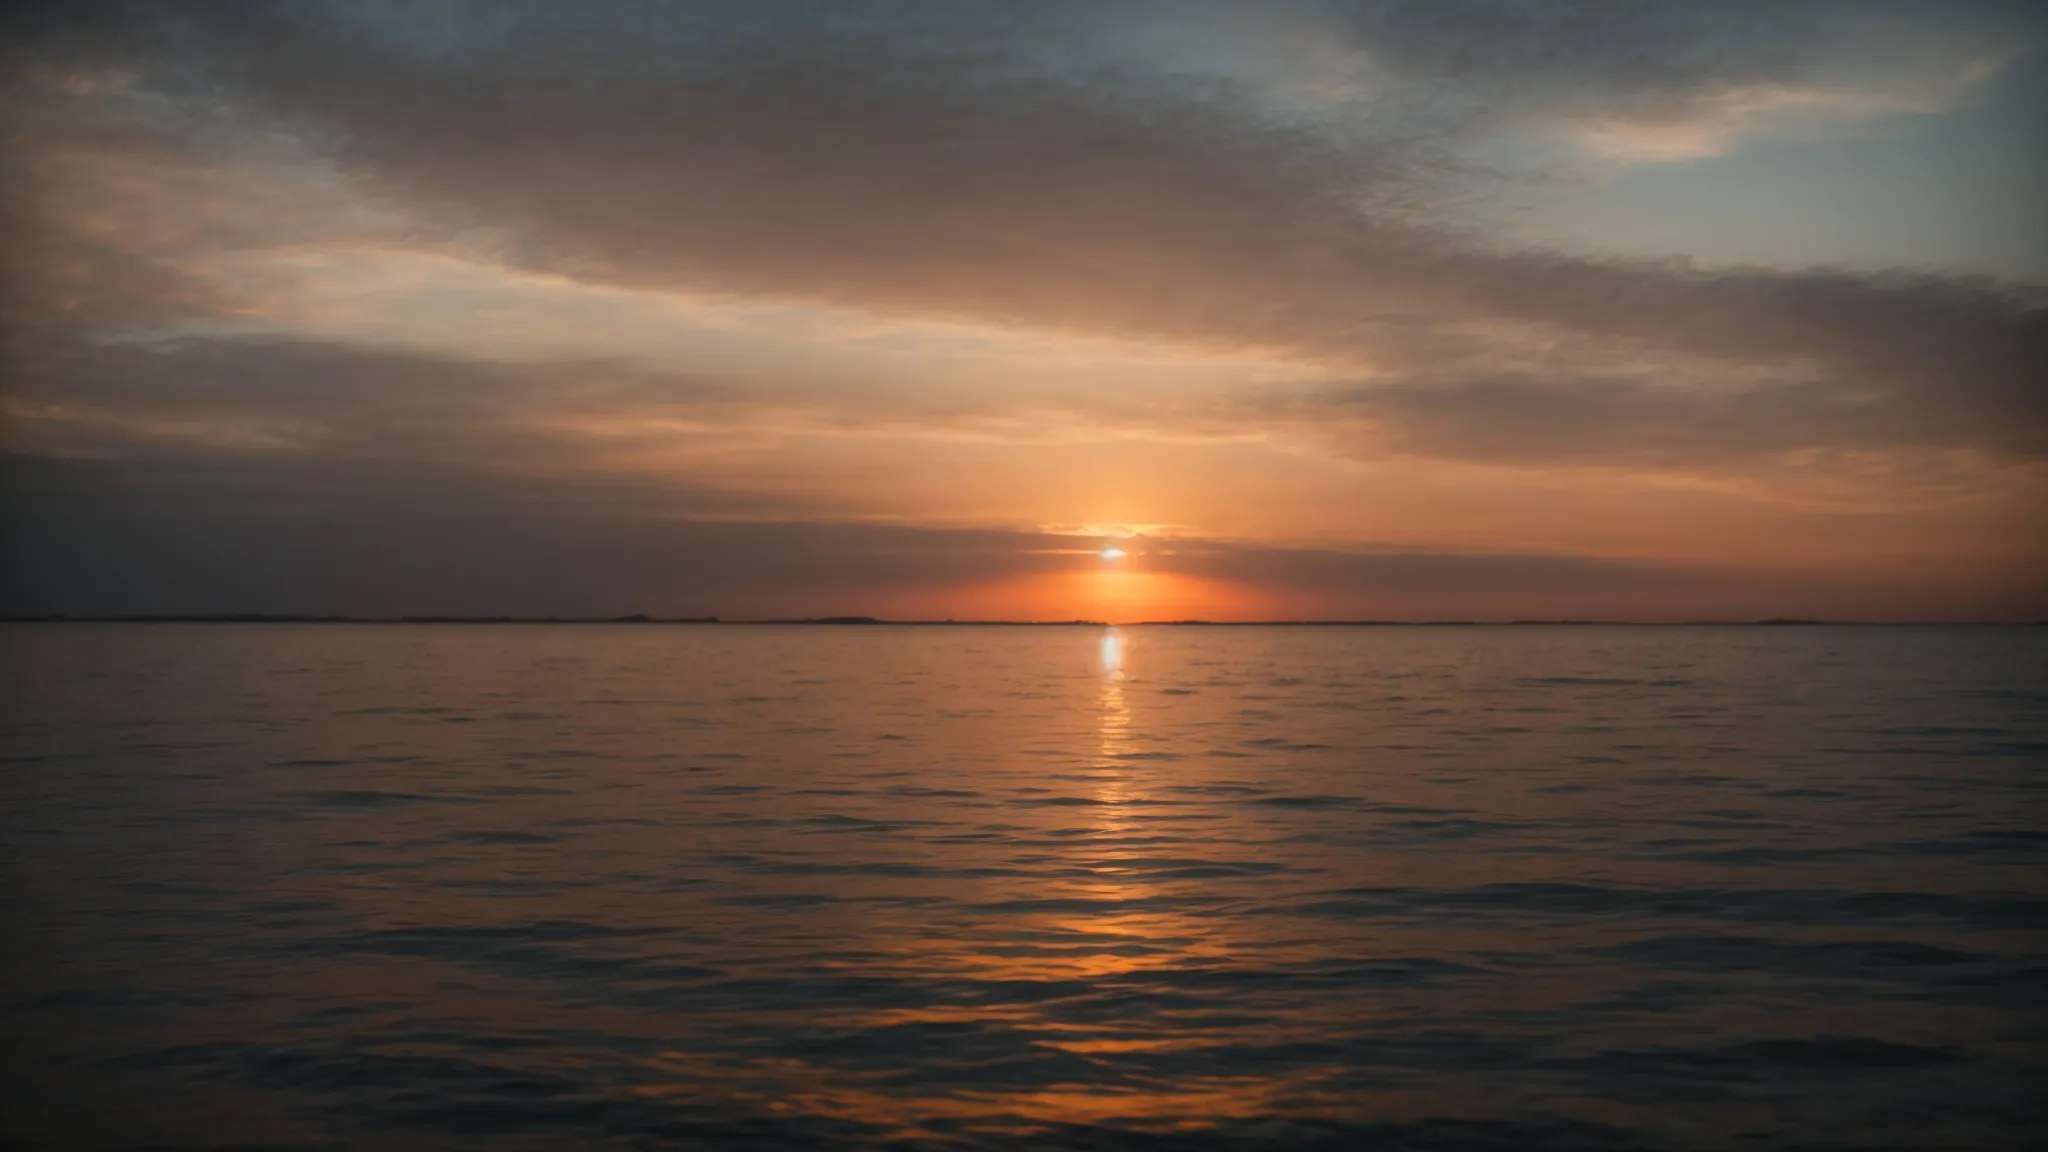 a glowing sunrise over a calm sea, symbolizing hope and the beginning of a journey towards financial security.